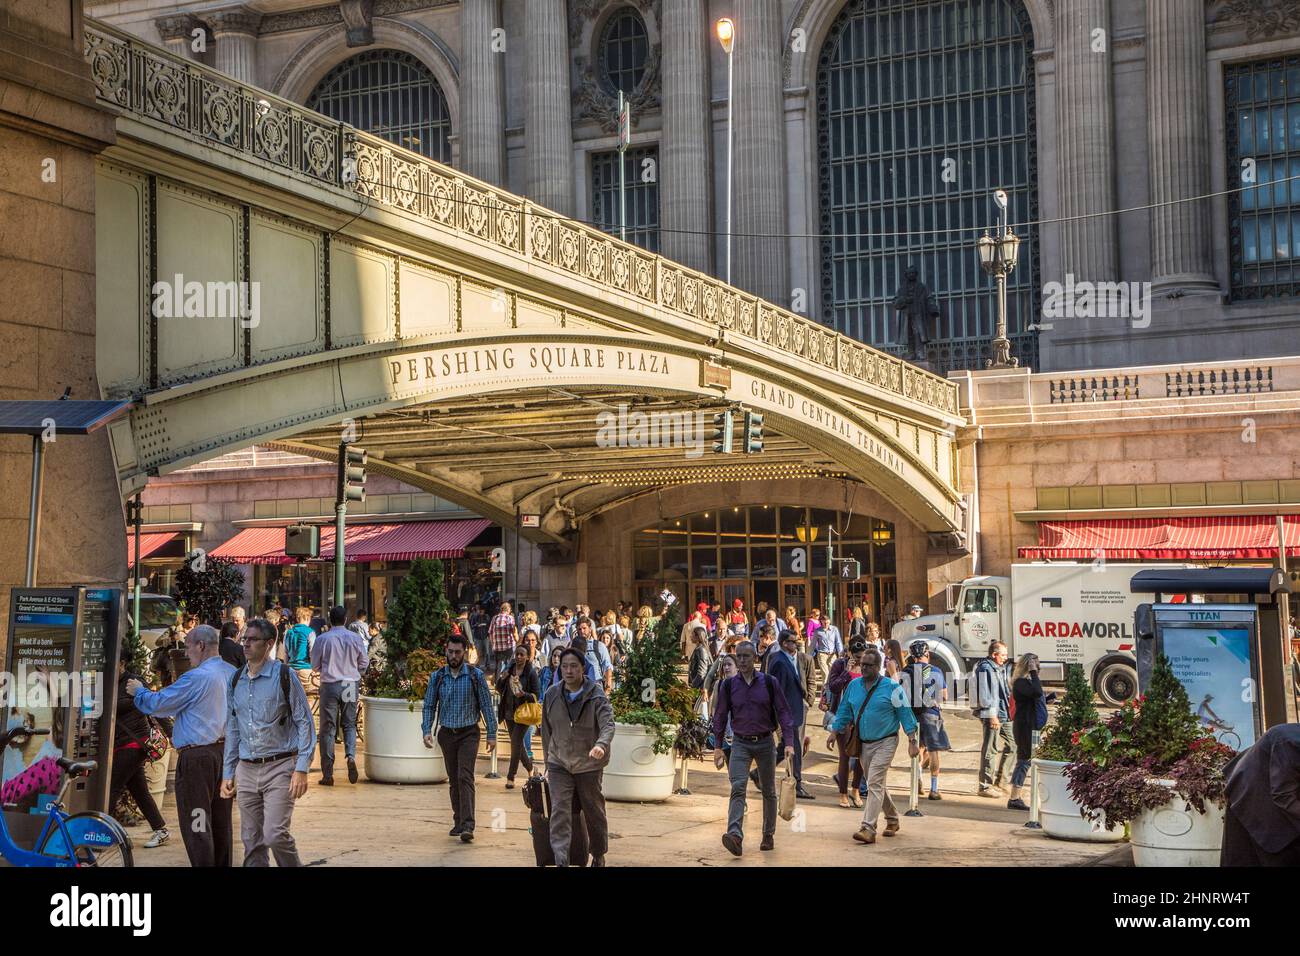 people hurry at persing square plaza in the crowded streets. Some arrive at Grand central station Stock Photo